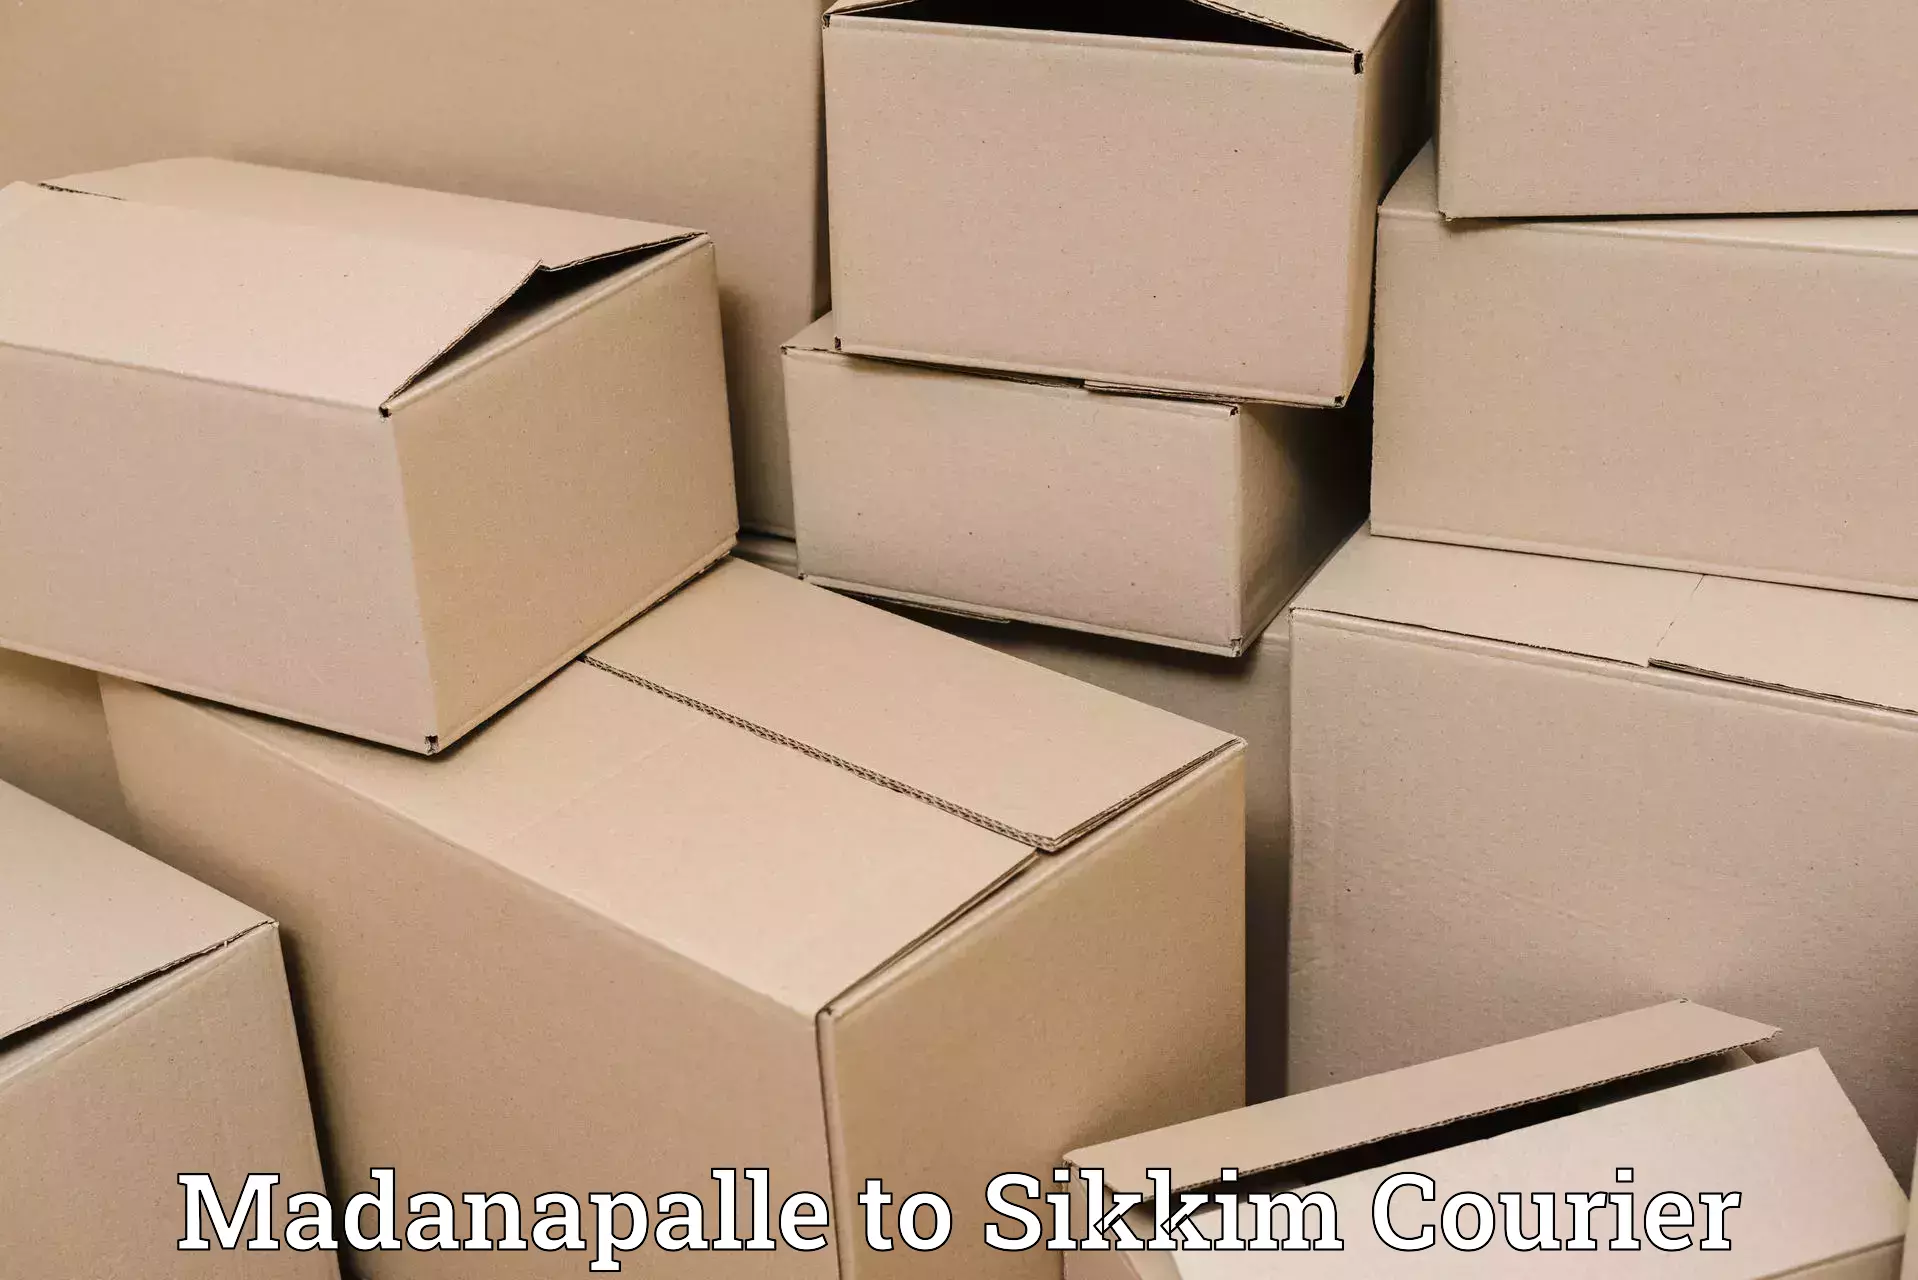 Express delivery capabilities Madanapalle to Rangpo